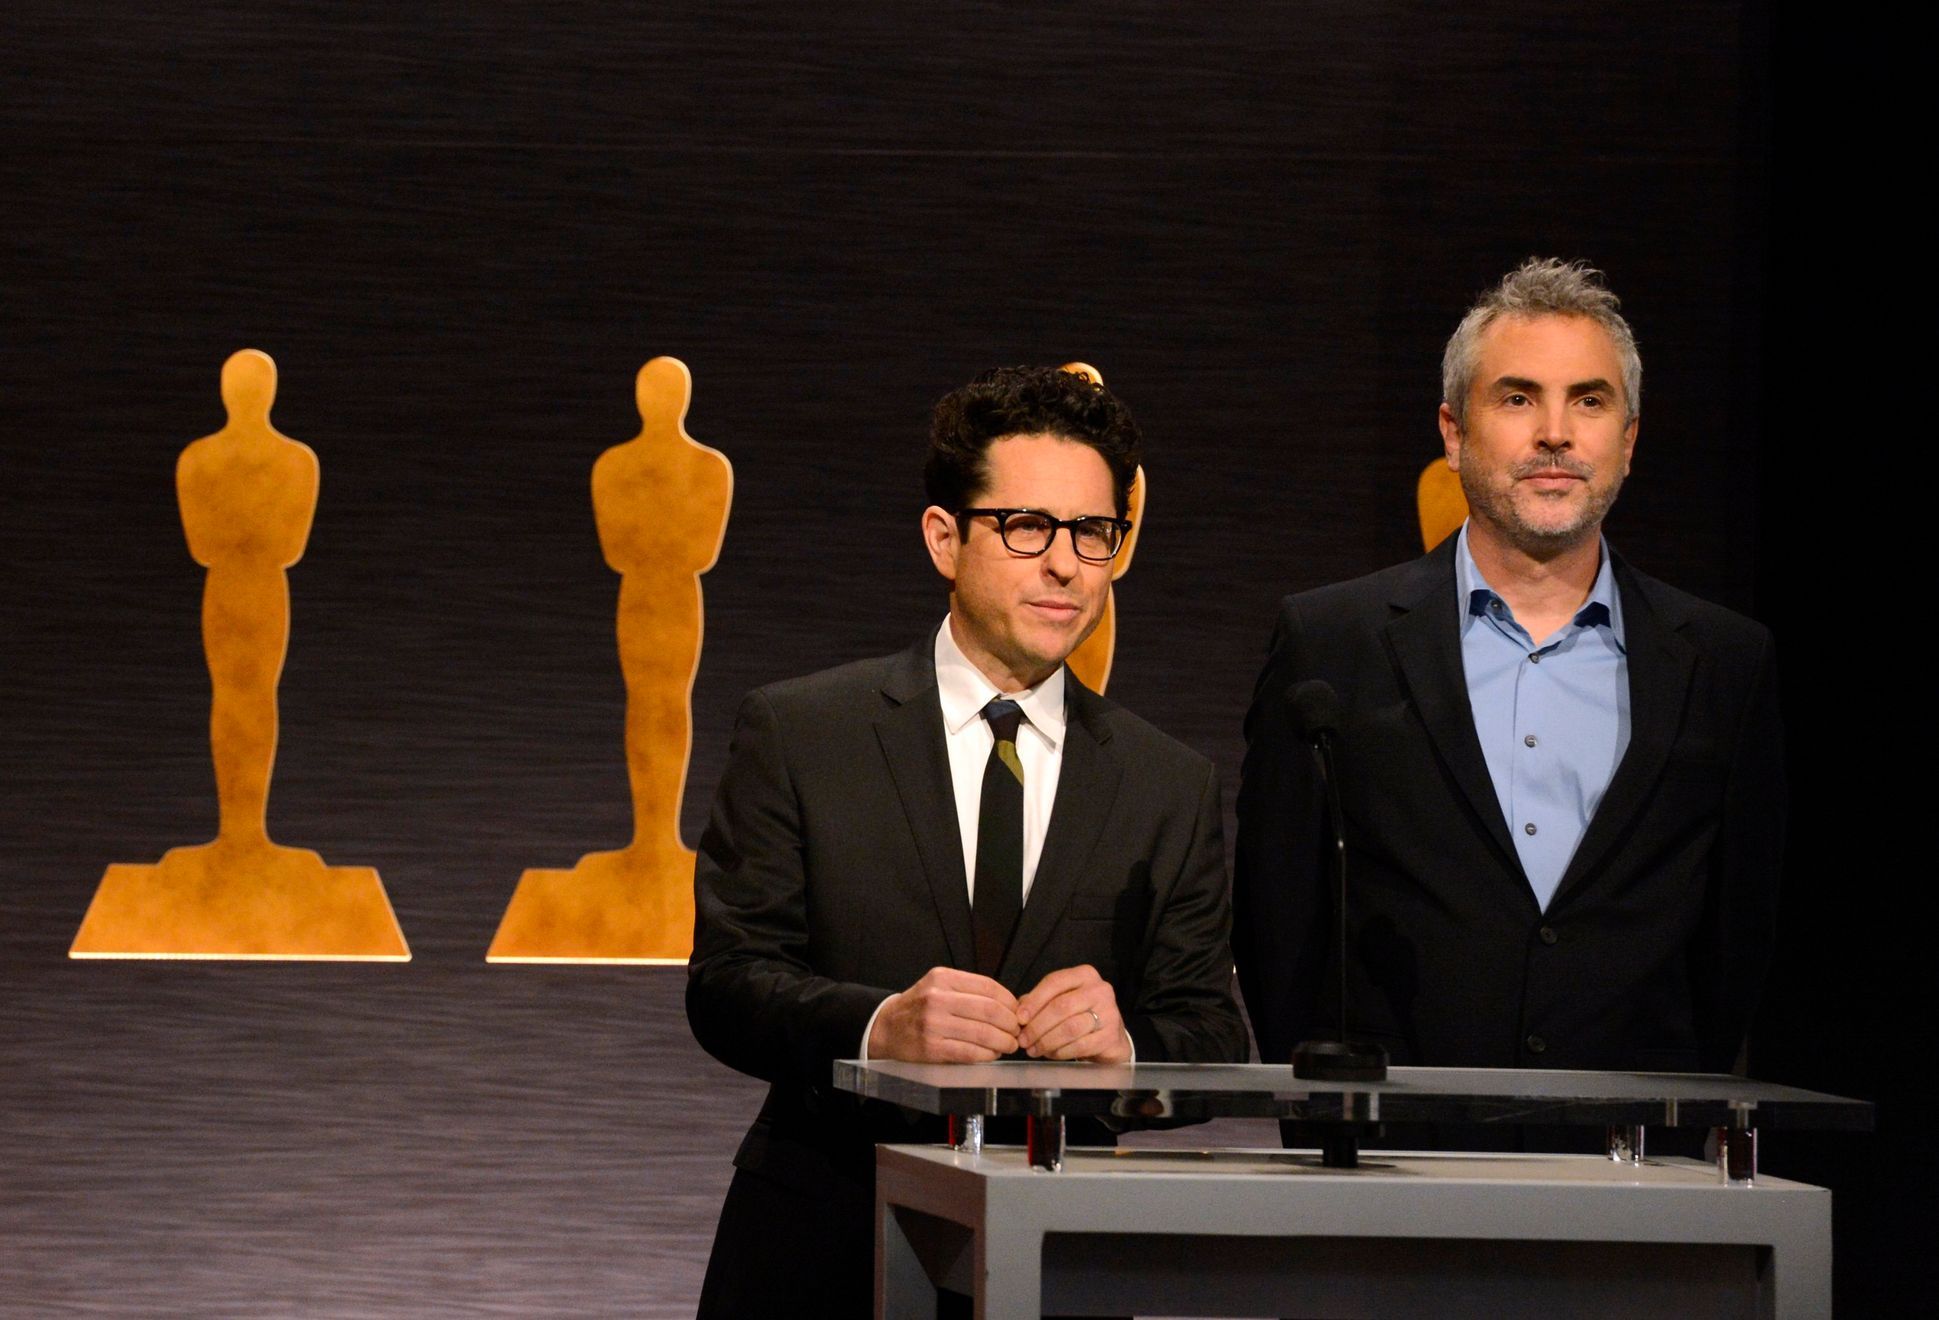 JJ Abrams and Alfonso Cuaron announce the nominees for the 87th Academy Awards in Beverly Hills, California